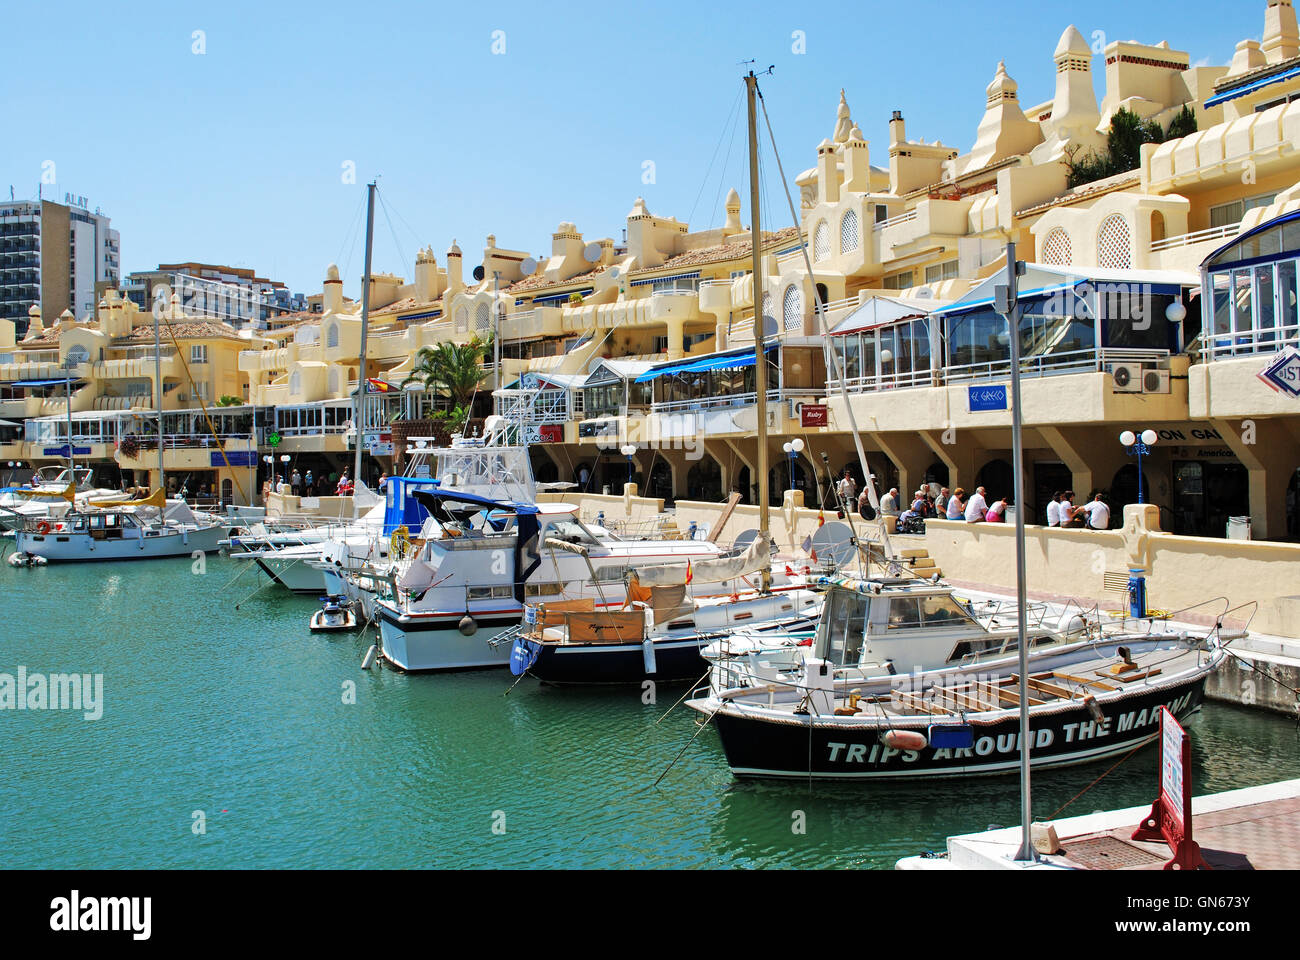 View of boats and waterfront in the marina area, Benalmadena, Costa del ...